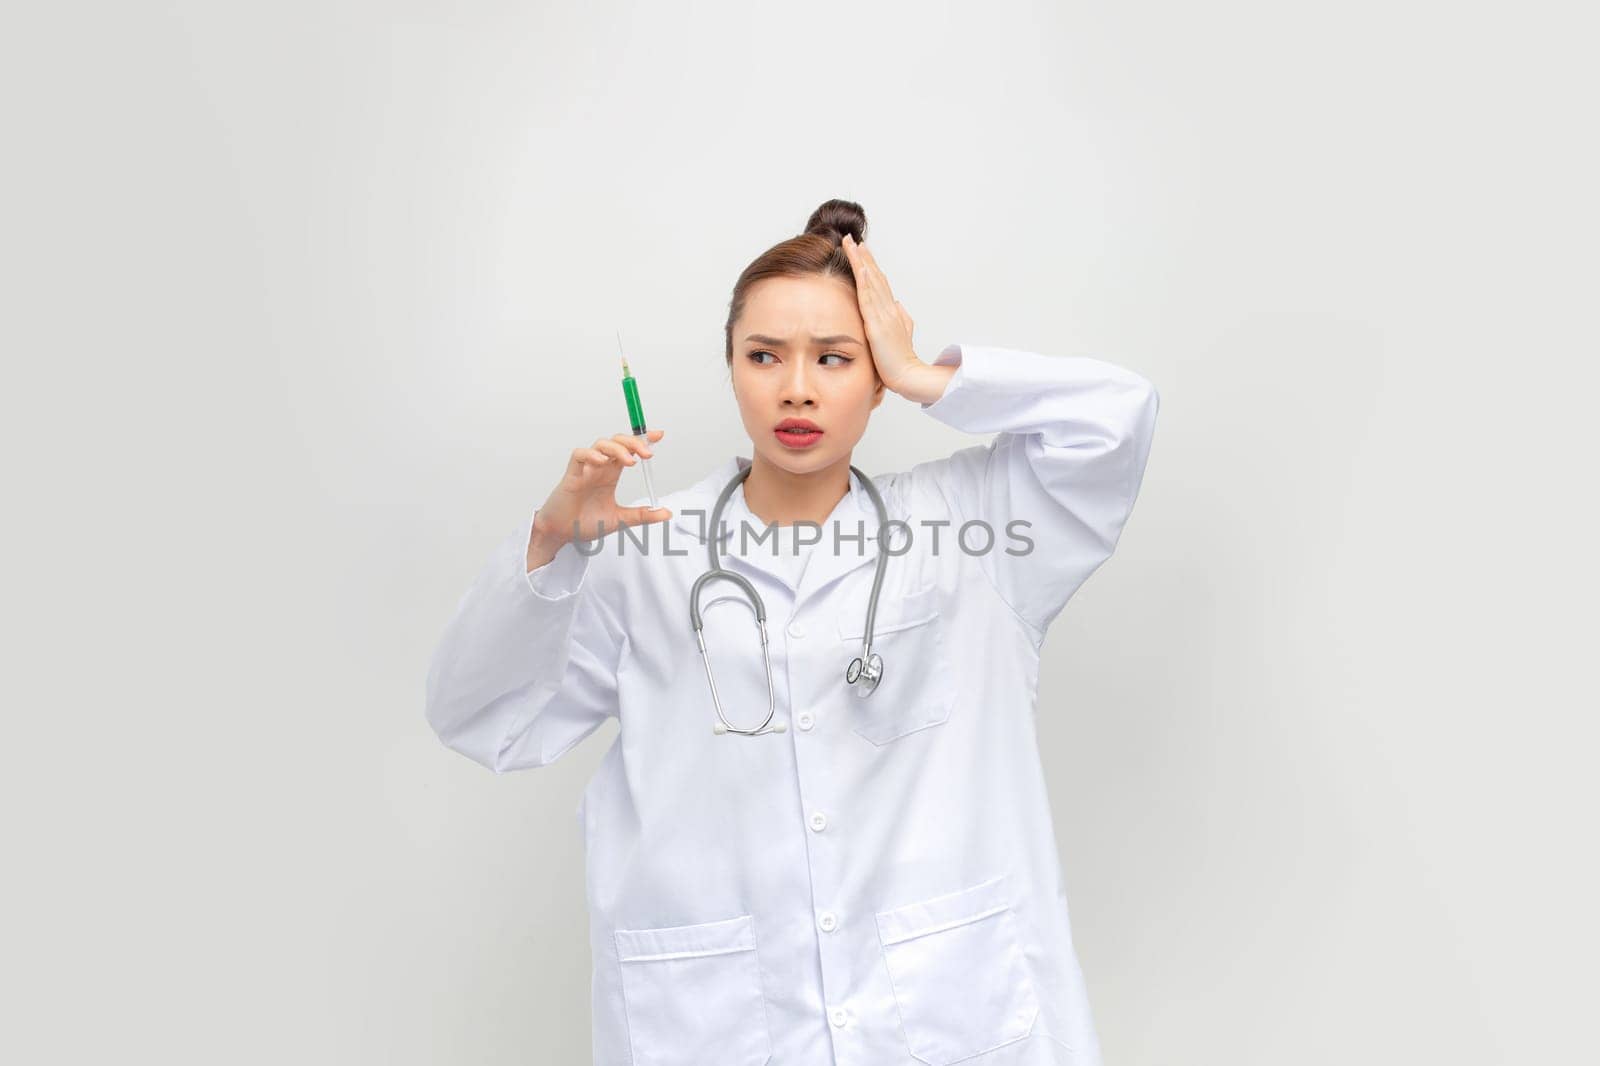 Asian woman with braids holding syringe stressed and frustrated with hand on head